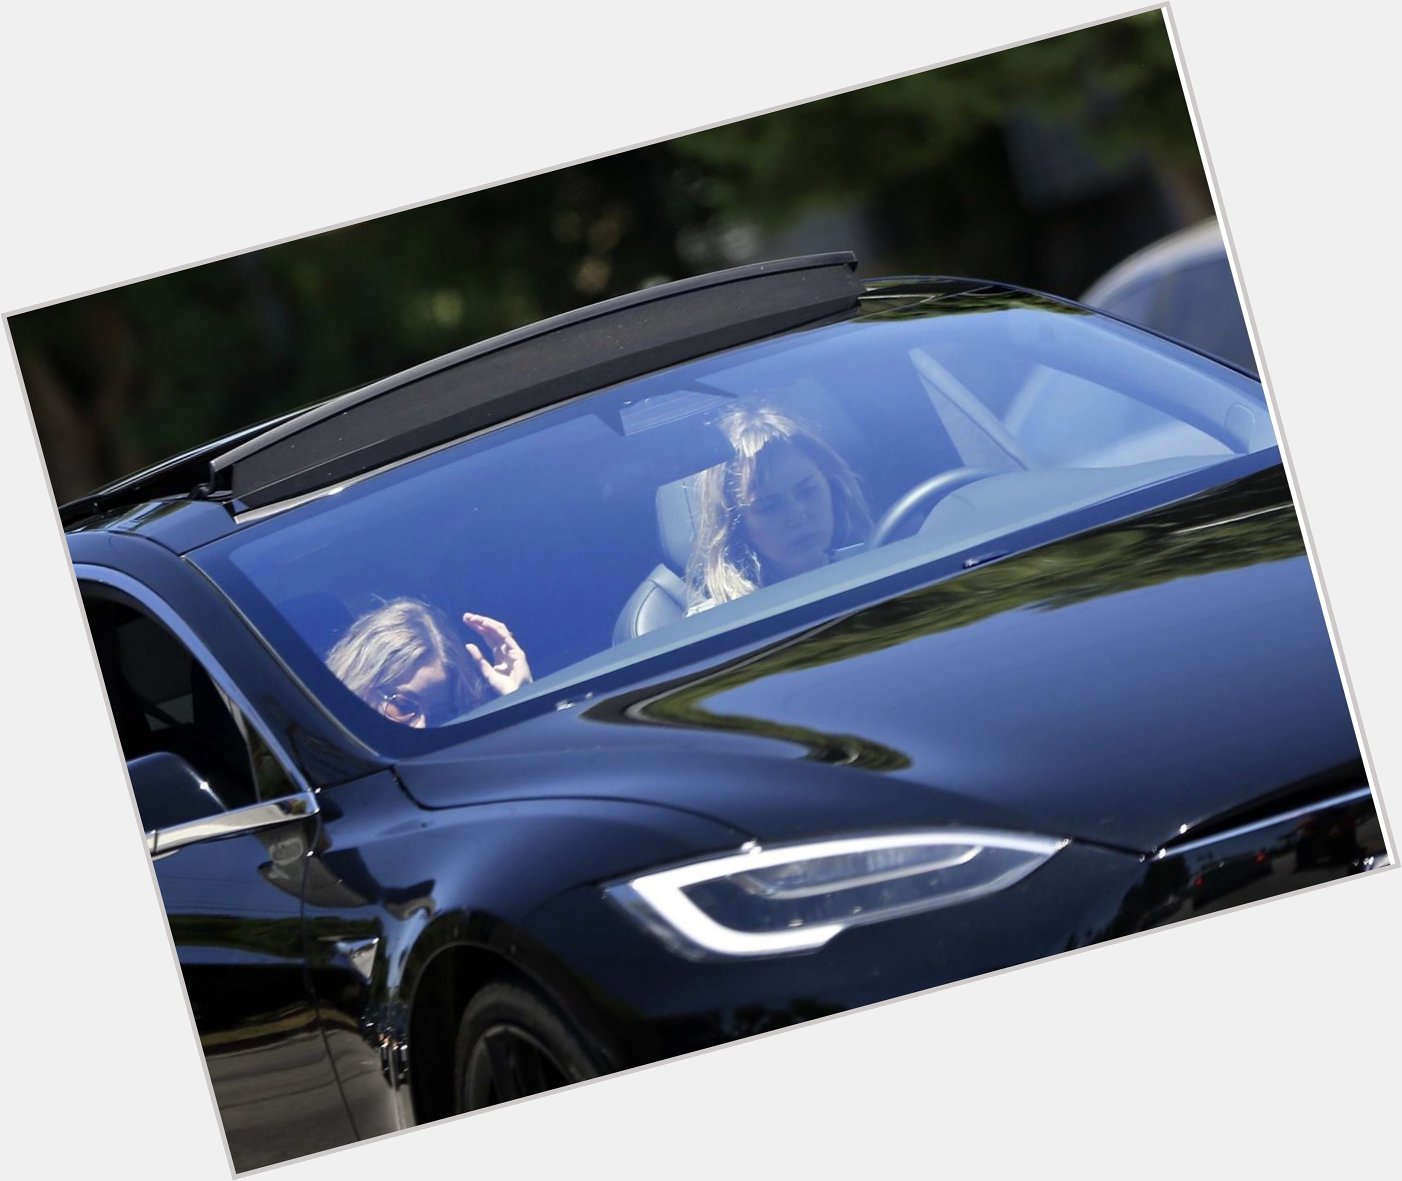 Lookin good in your Tesla Model S......hope you have a Happy Birthday today Miley Cyrus!!!     